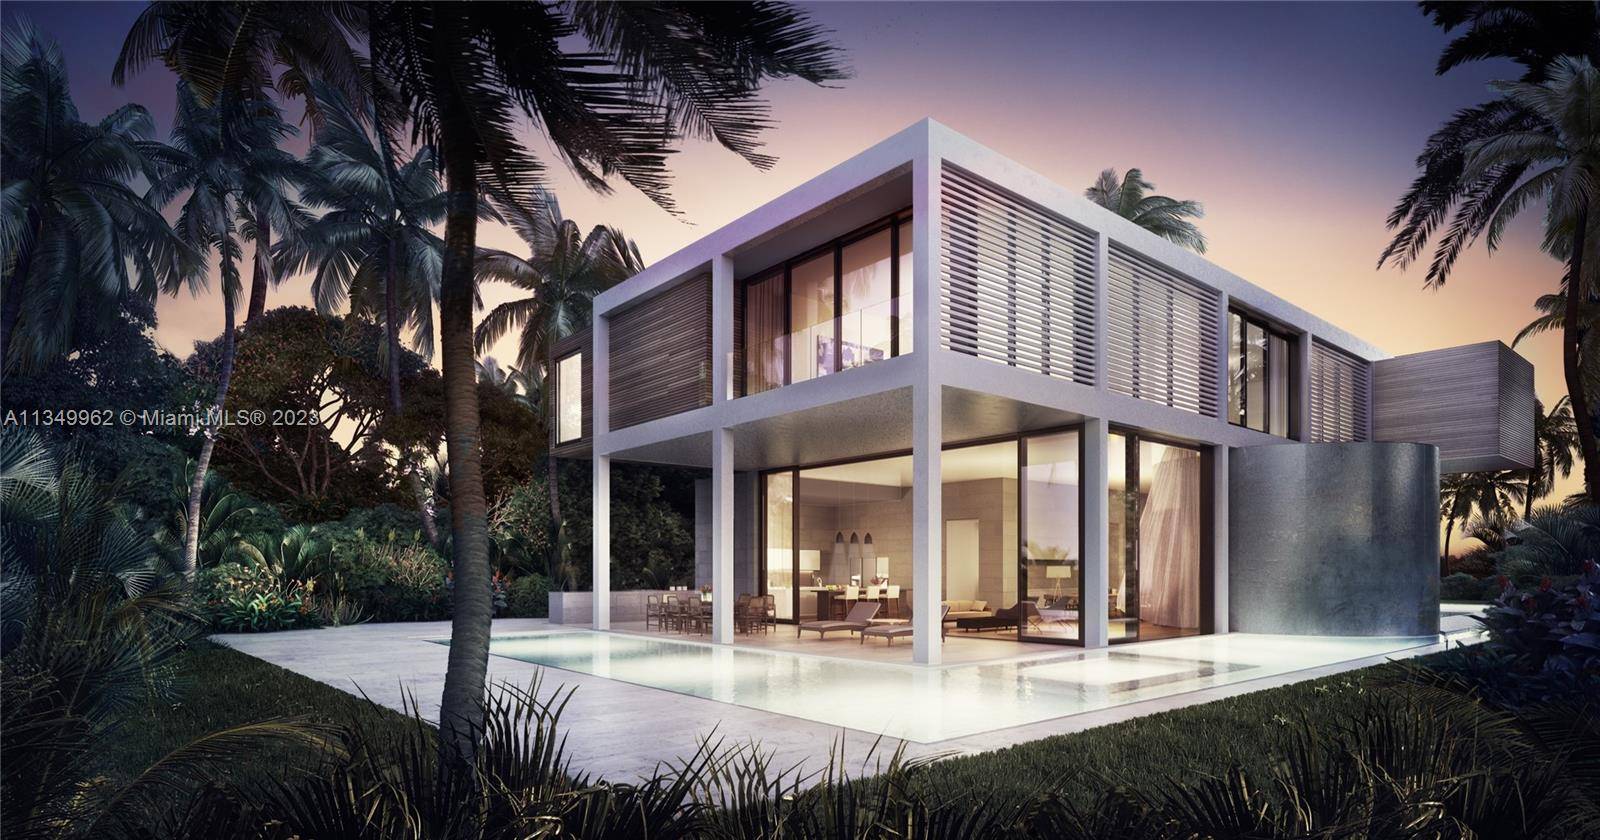 Experience modern beach living in this 7, 500 Sq Ft luxury single family home designed by world renowned architect Chad Oppenheim.